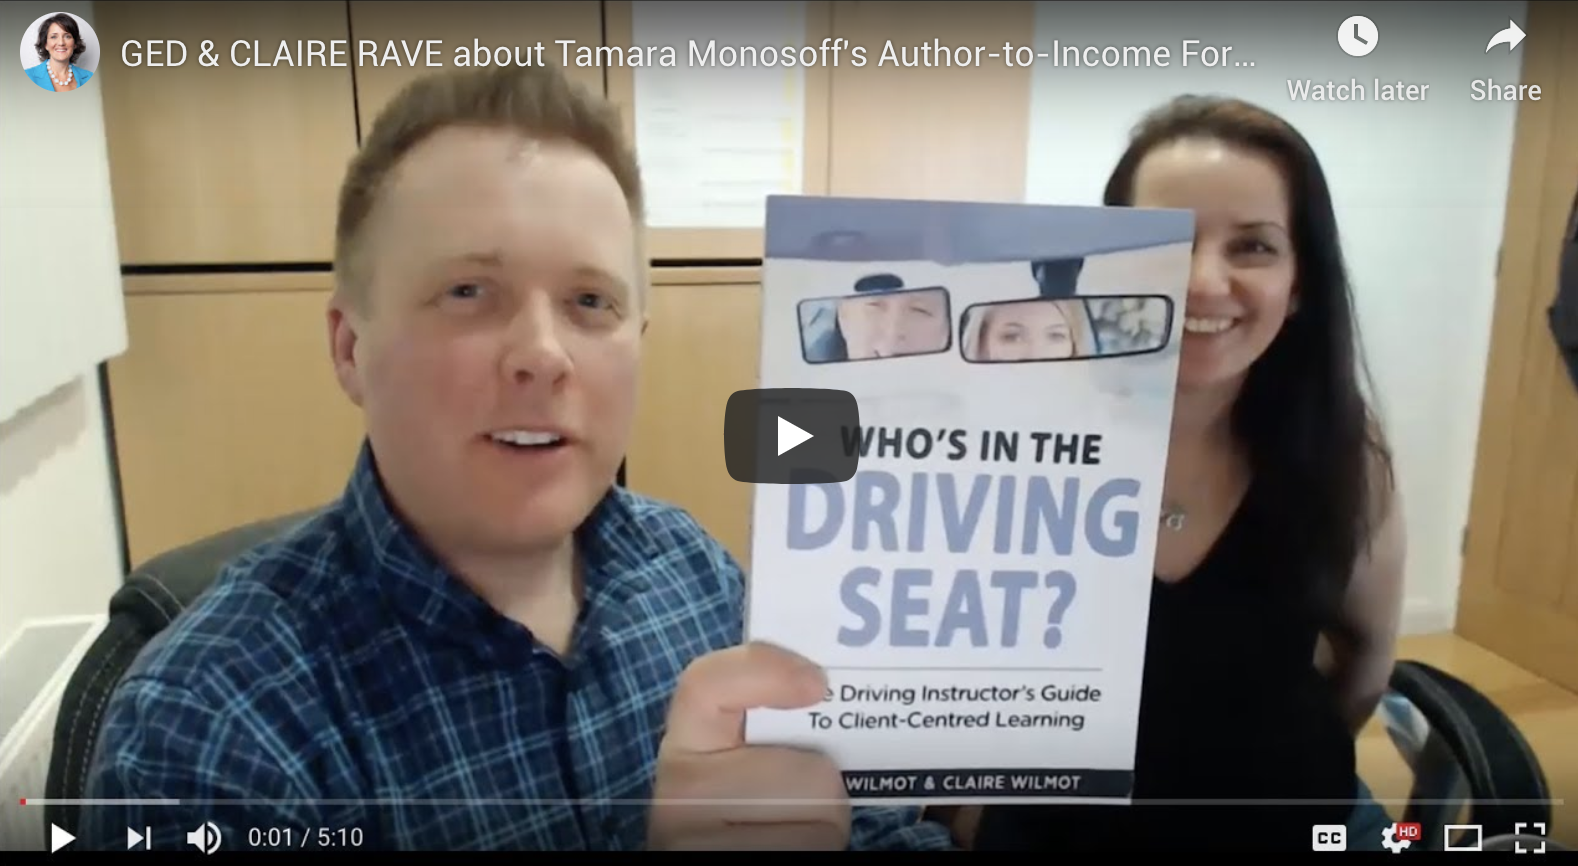 Ged & Claire Rave about Tamara Monosoff's Author-to-Income Formula